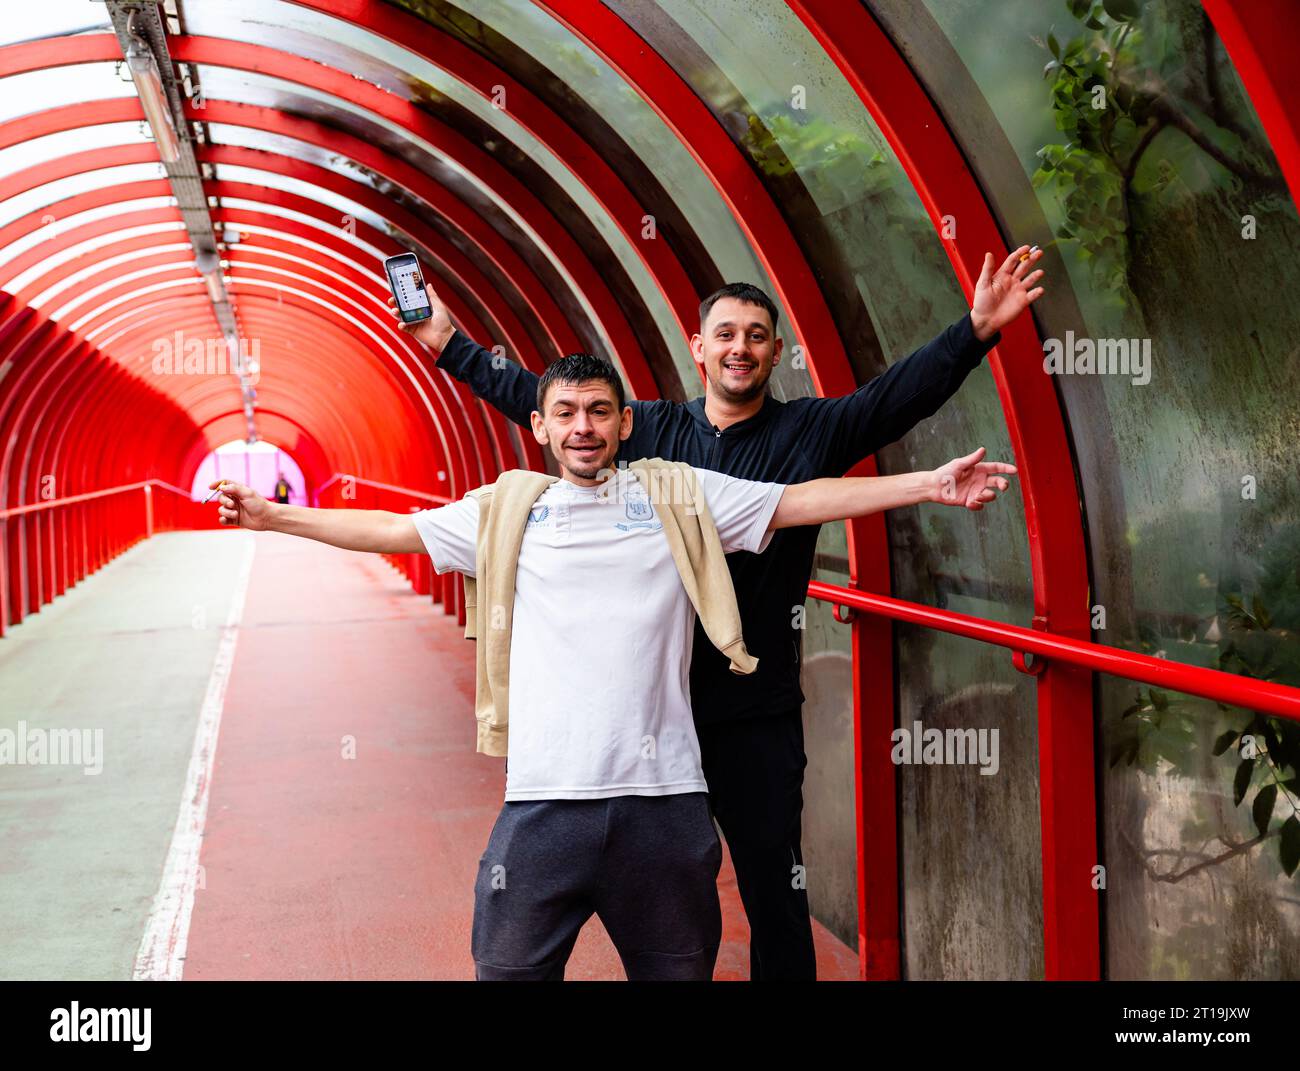 Two likely locals happily posing with phones and cigarettes in their hands and insistent that their photo was taken in the SECC tunnel/ bridge Stock Photo